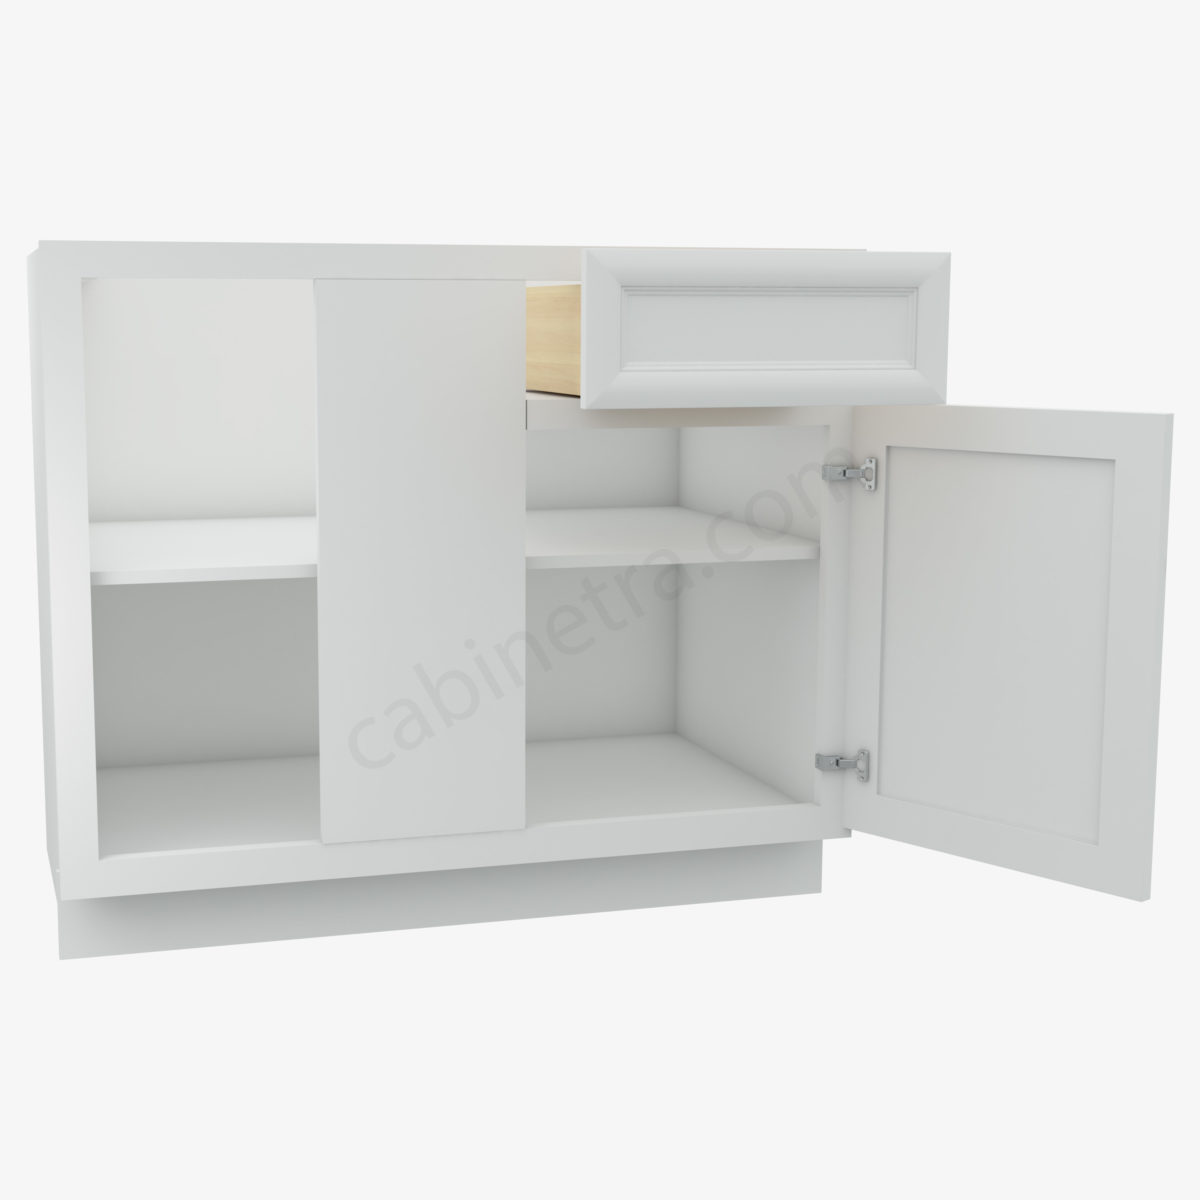 KW BBLC42 45 39W 1  Forevermark K White Cabinetra scaled